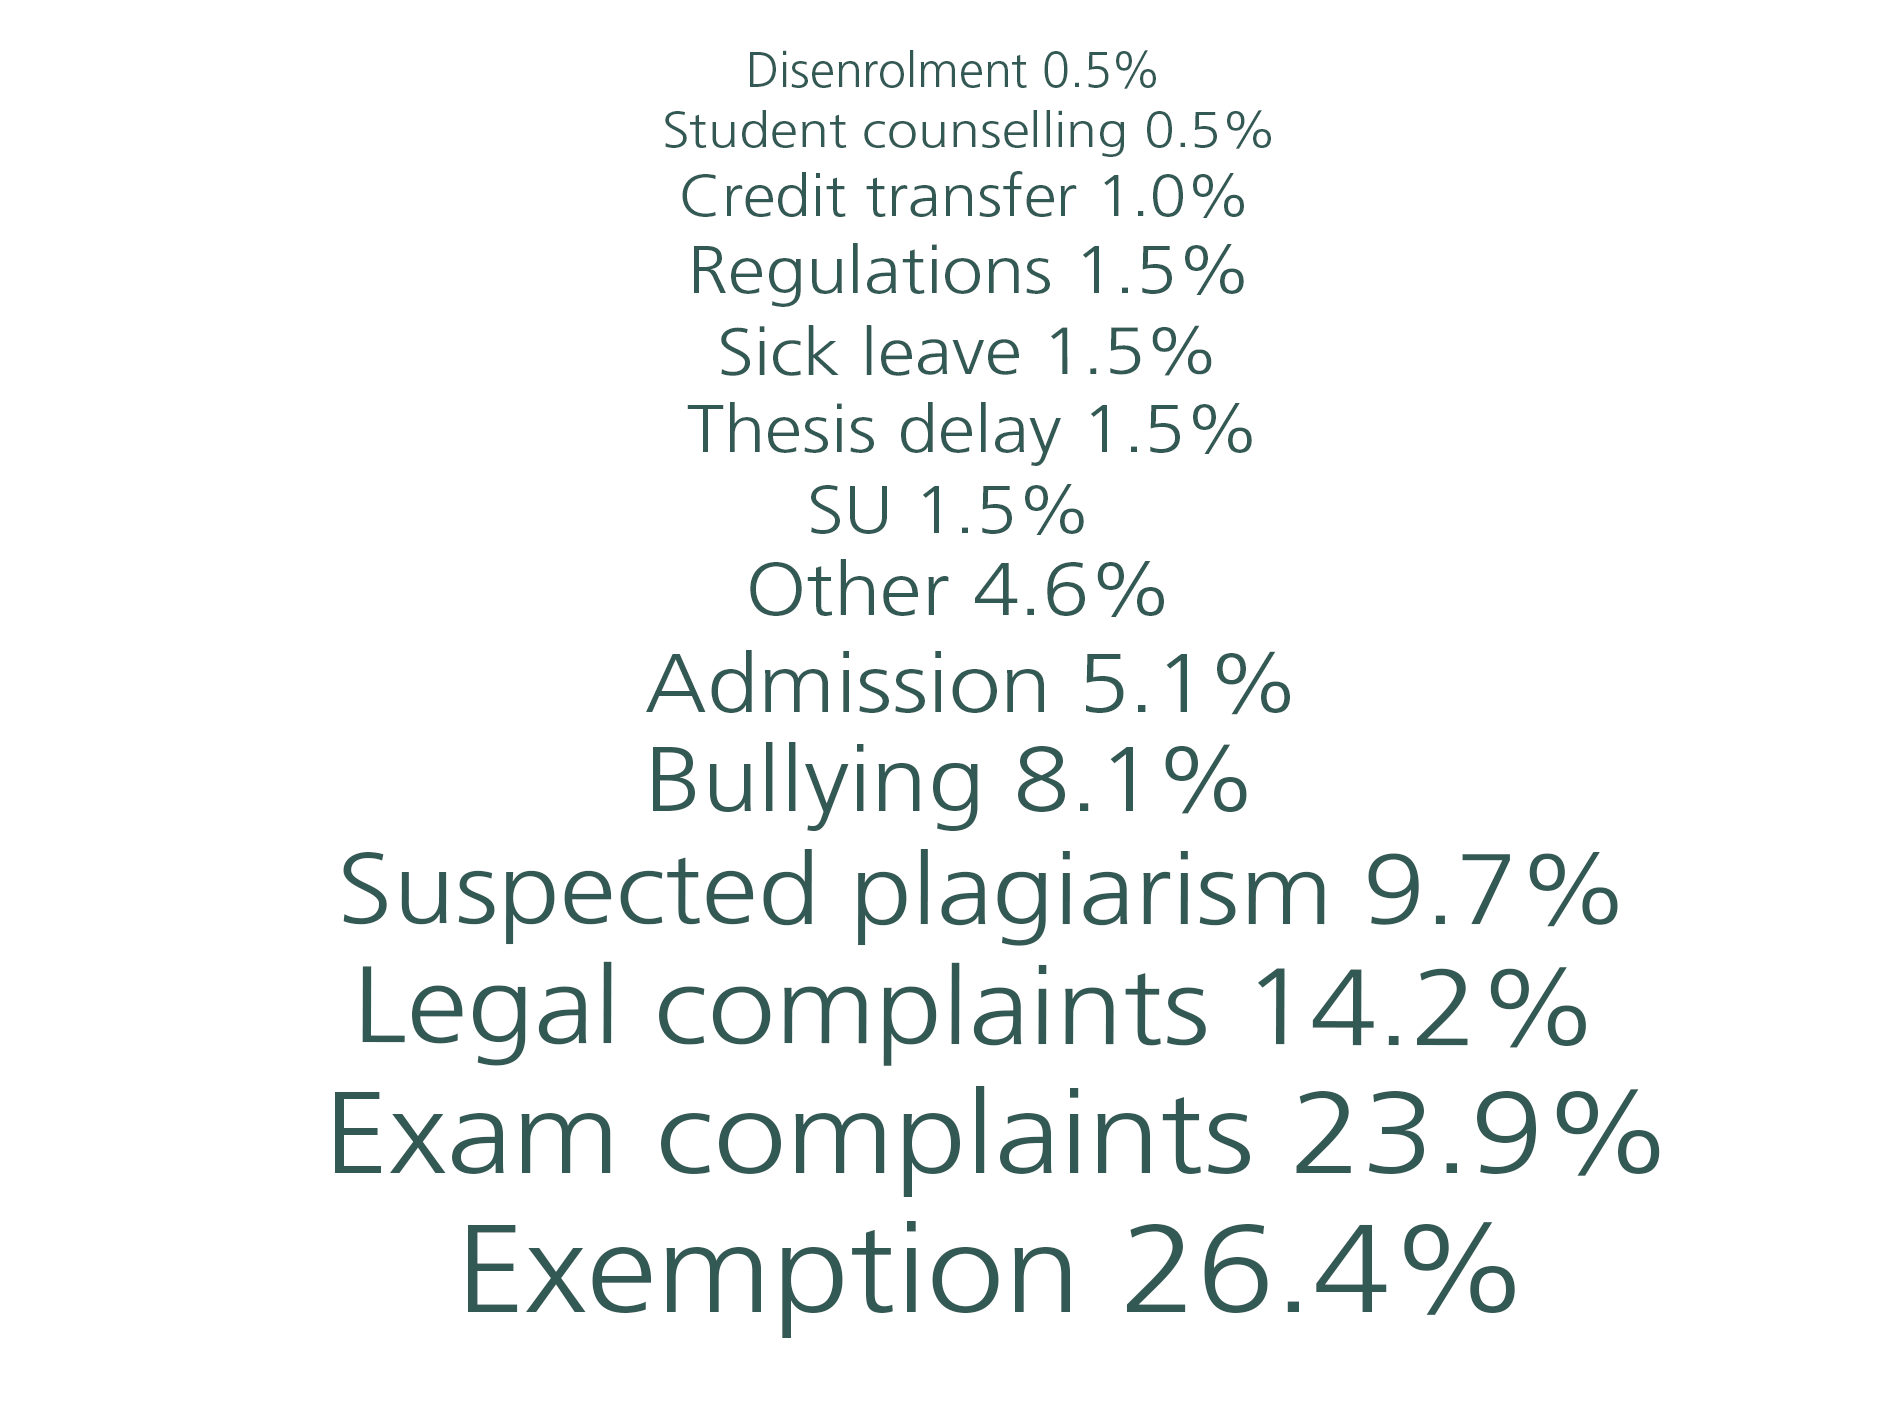 Dispensation: 26.4% Exam appeals: 23.9% Legal complaints 14.2% Suspected exam cheating: 9.7% Bullying: 8.1% Intake: 5.1% Other: 4.6% SU: 1.5% Thesis delay: 1.5% Sick leave: 1.5% Rules of conduct: 1.5% Credit transfer: 1.0% Student counselling: 0.5% Disenrolment: 0.5%